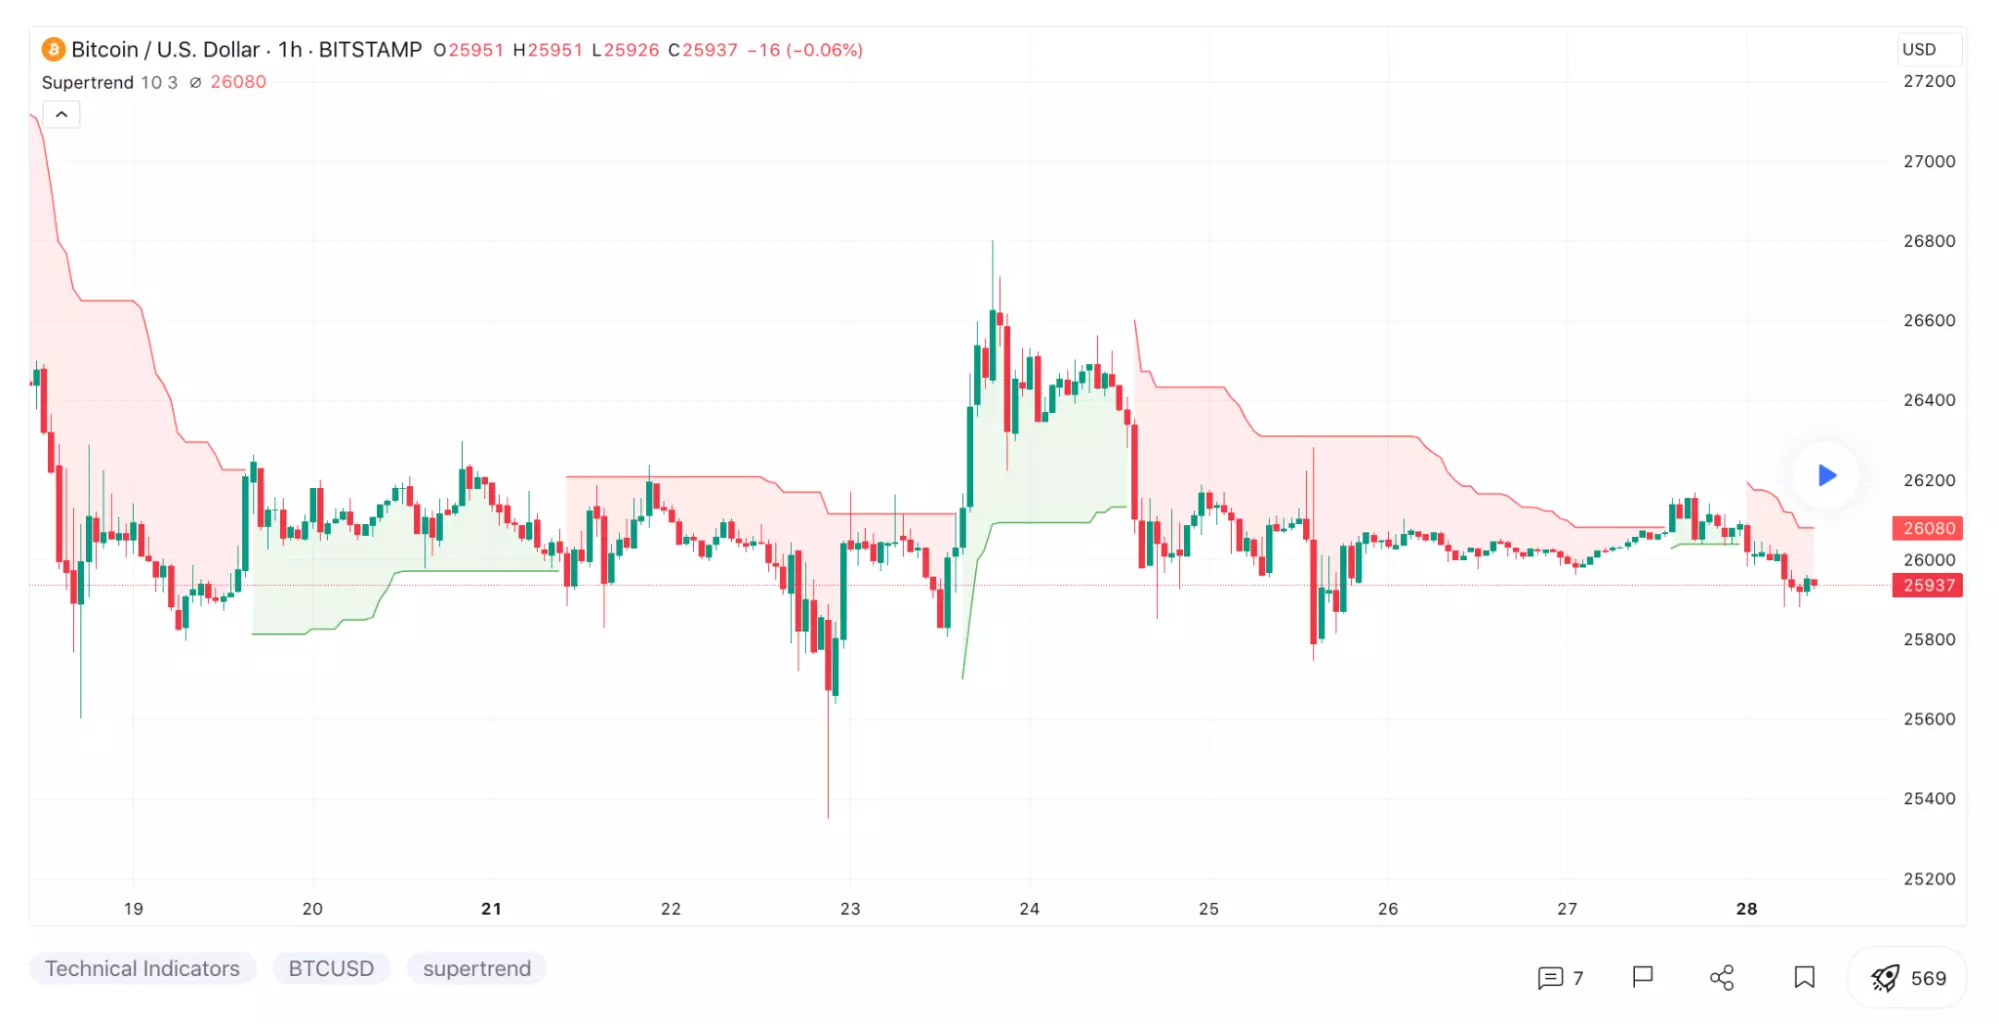 Bitcoin Price Chart and Supertrend Indicators (Source:tradingview.com)